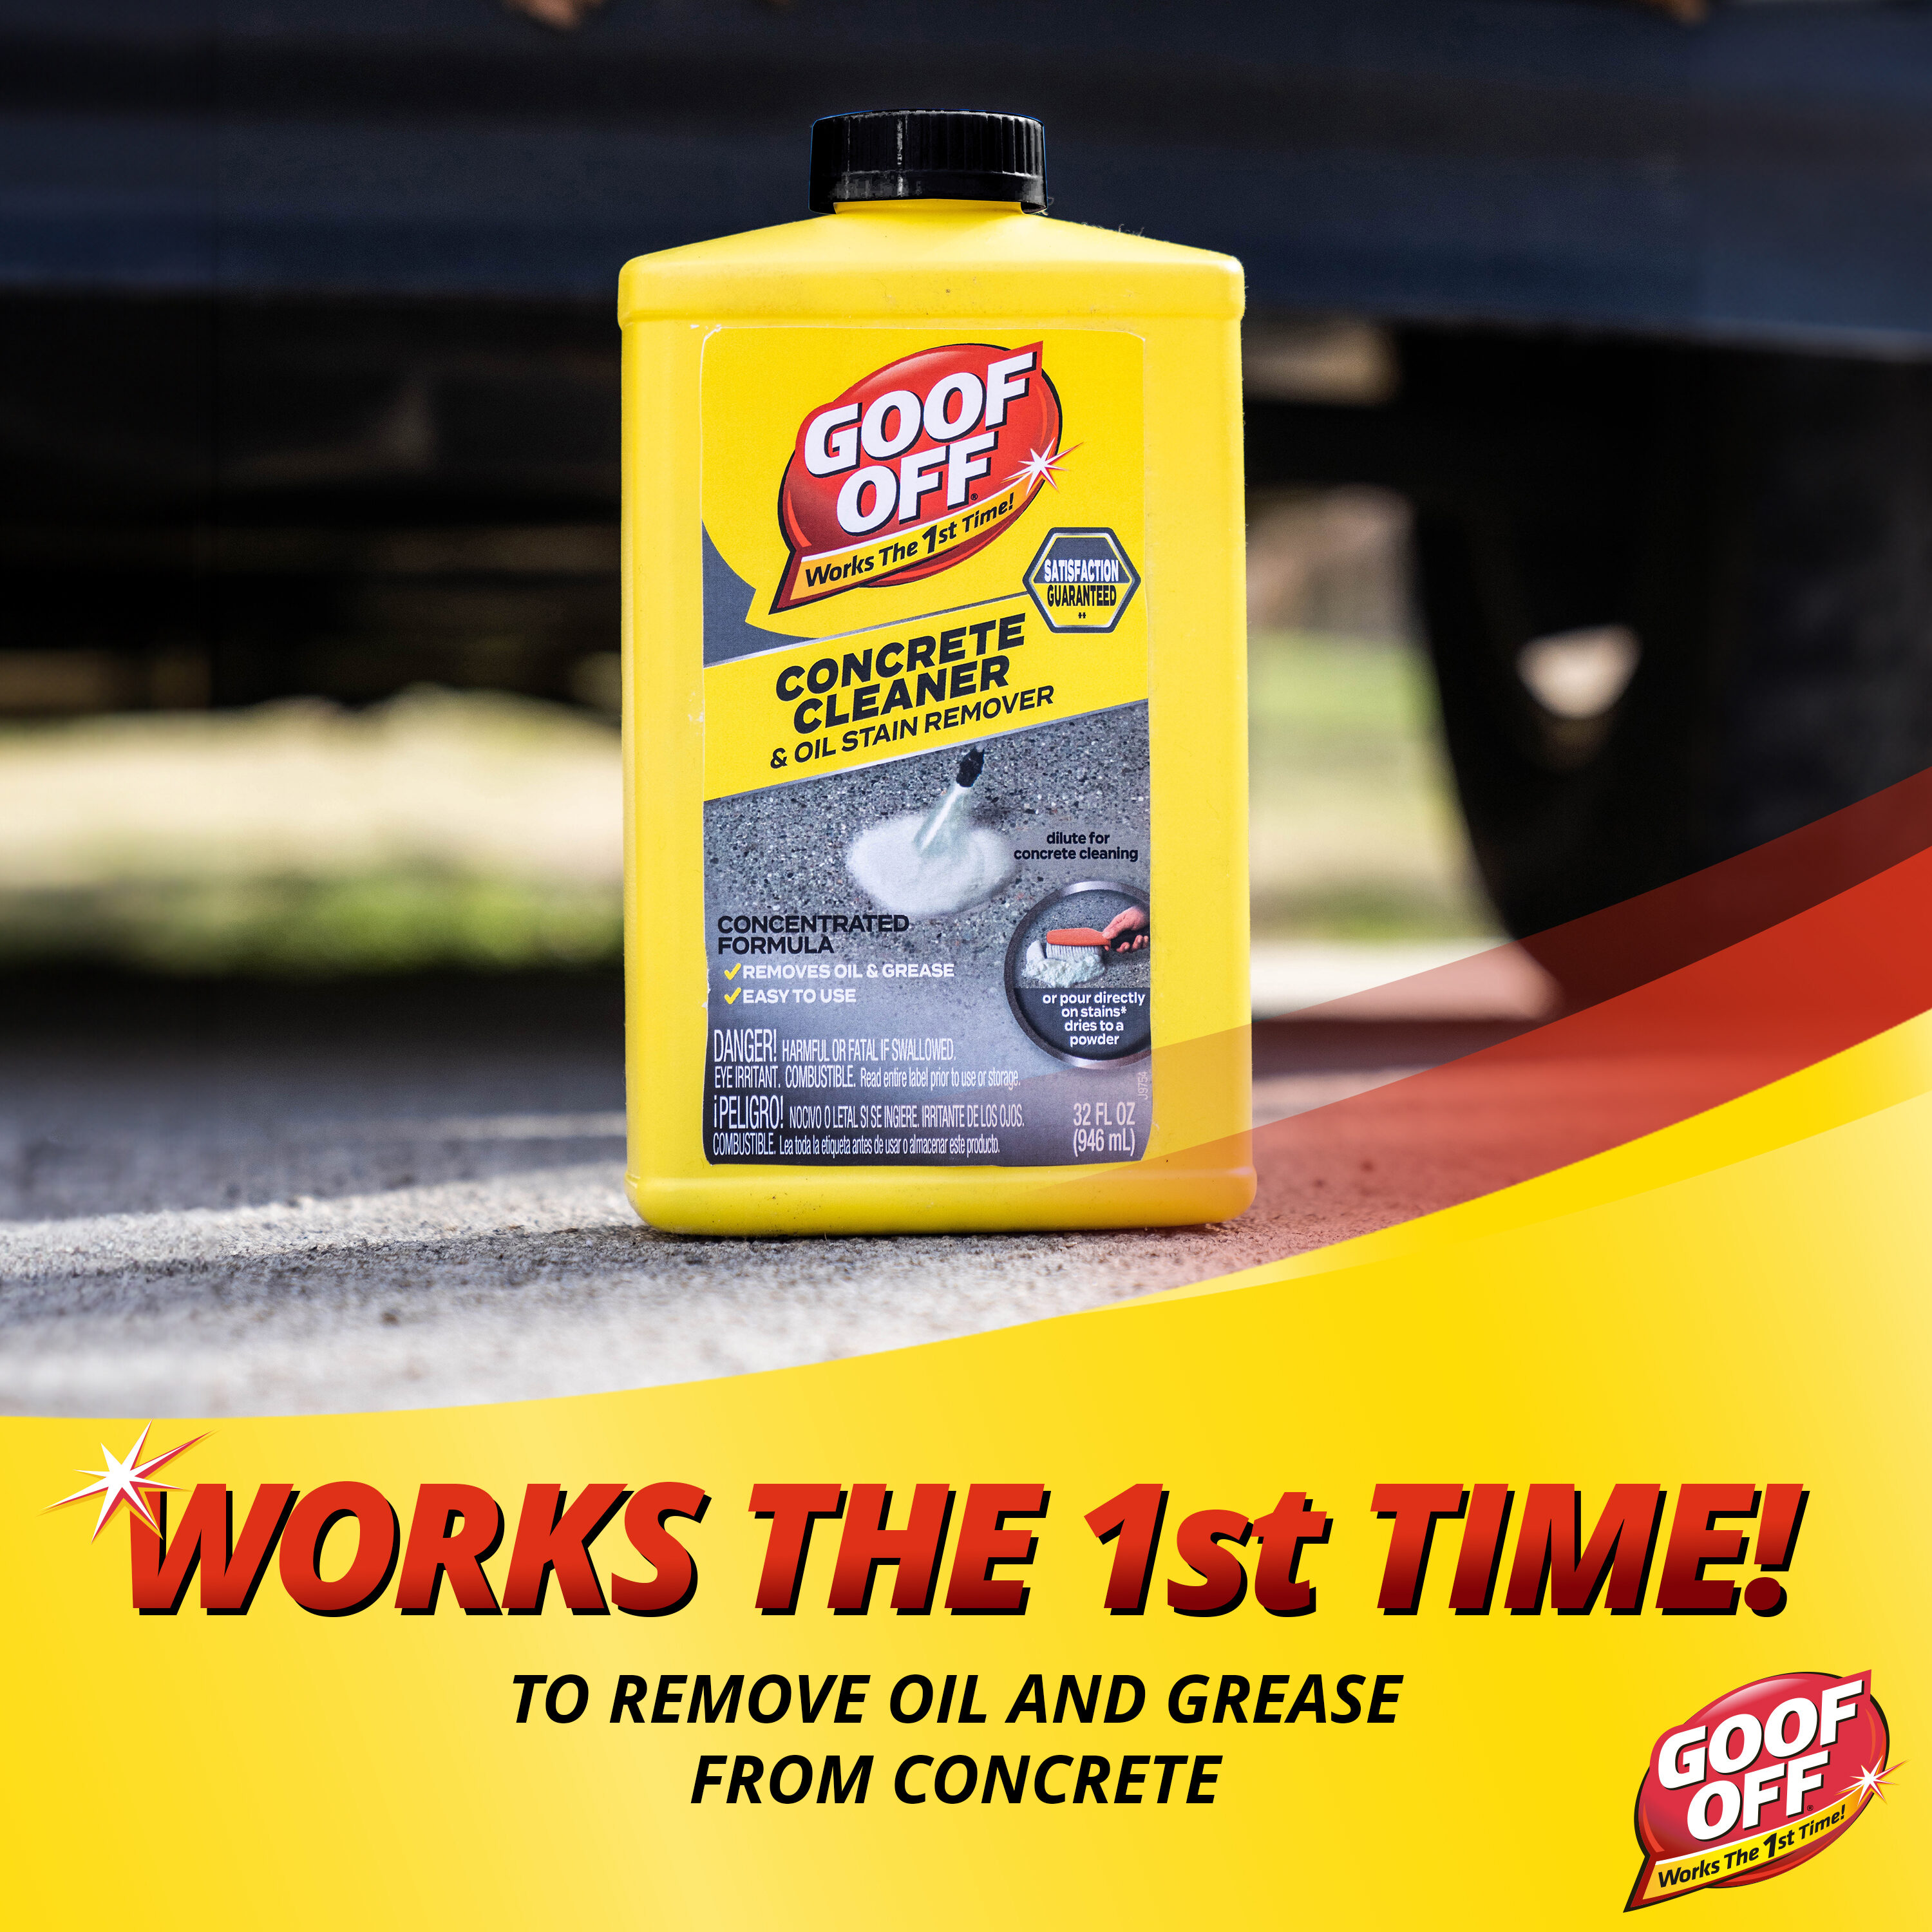 Goof Off 32 fl oz Pour Bottle Liquid Degreaser for Concrete Oil Stains,  Removes Grease and Oil